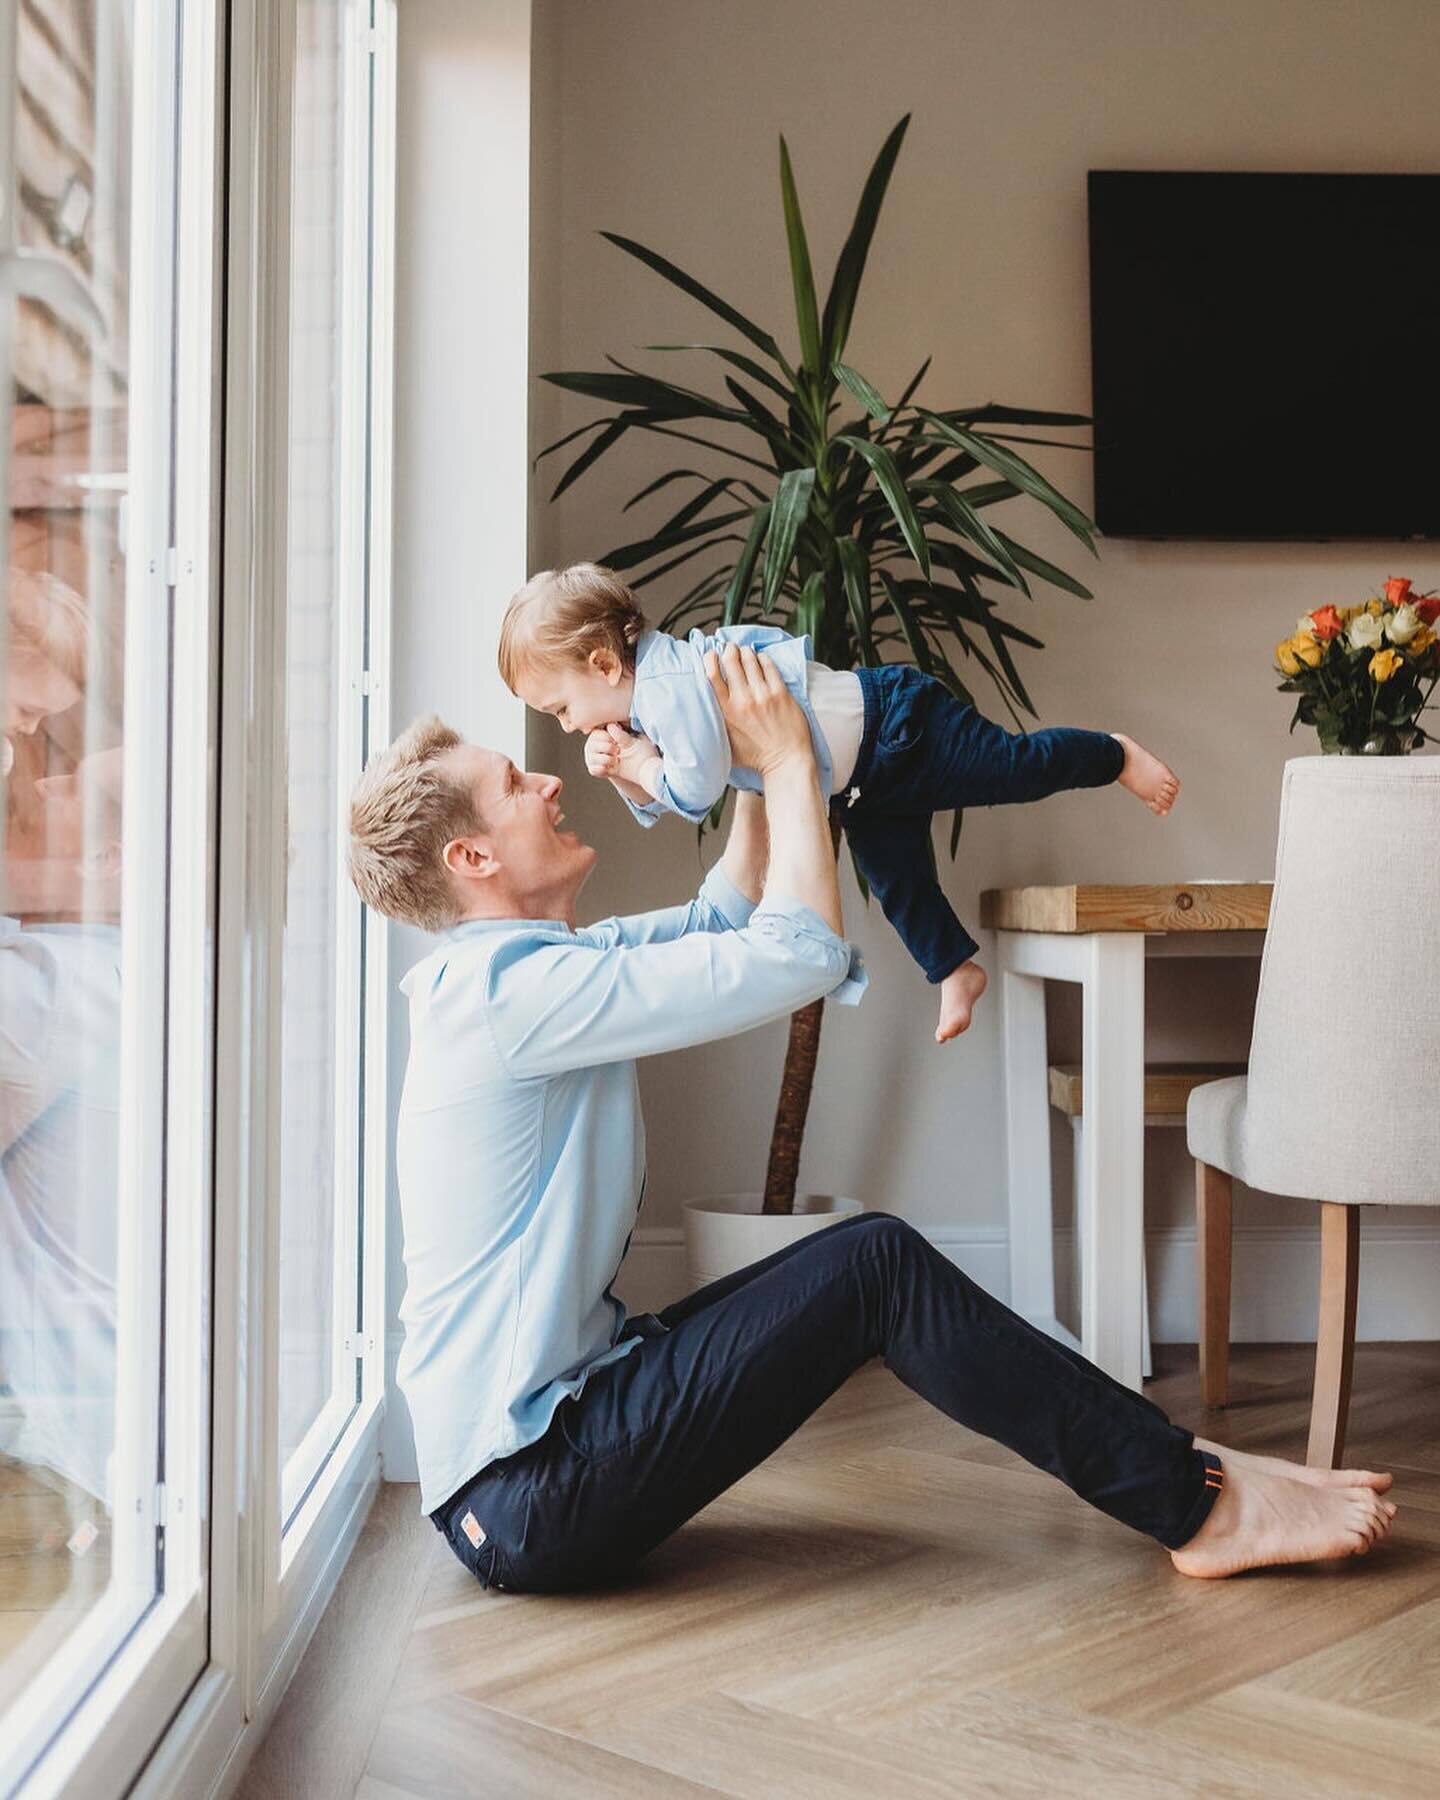 I adored this in-home session! 

The photo shoot was bought as a Mother&rsquo;s Day gift voucher when their baby had just been born but they chose to wait and use it when their little boy was 10 months old and really starting to show his personality.